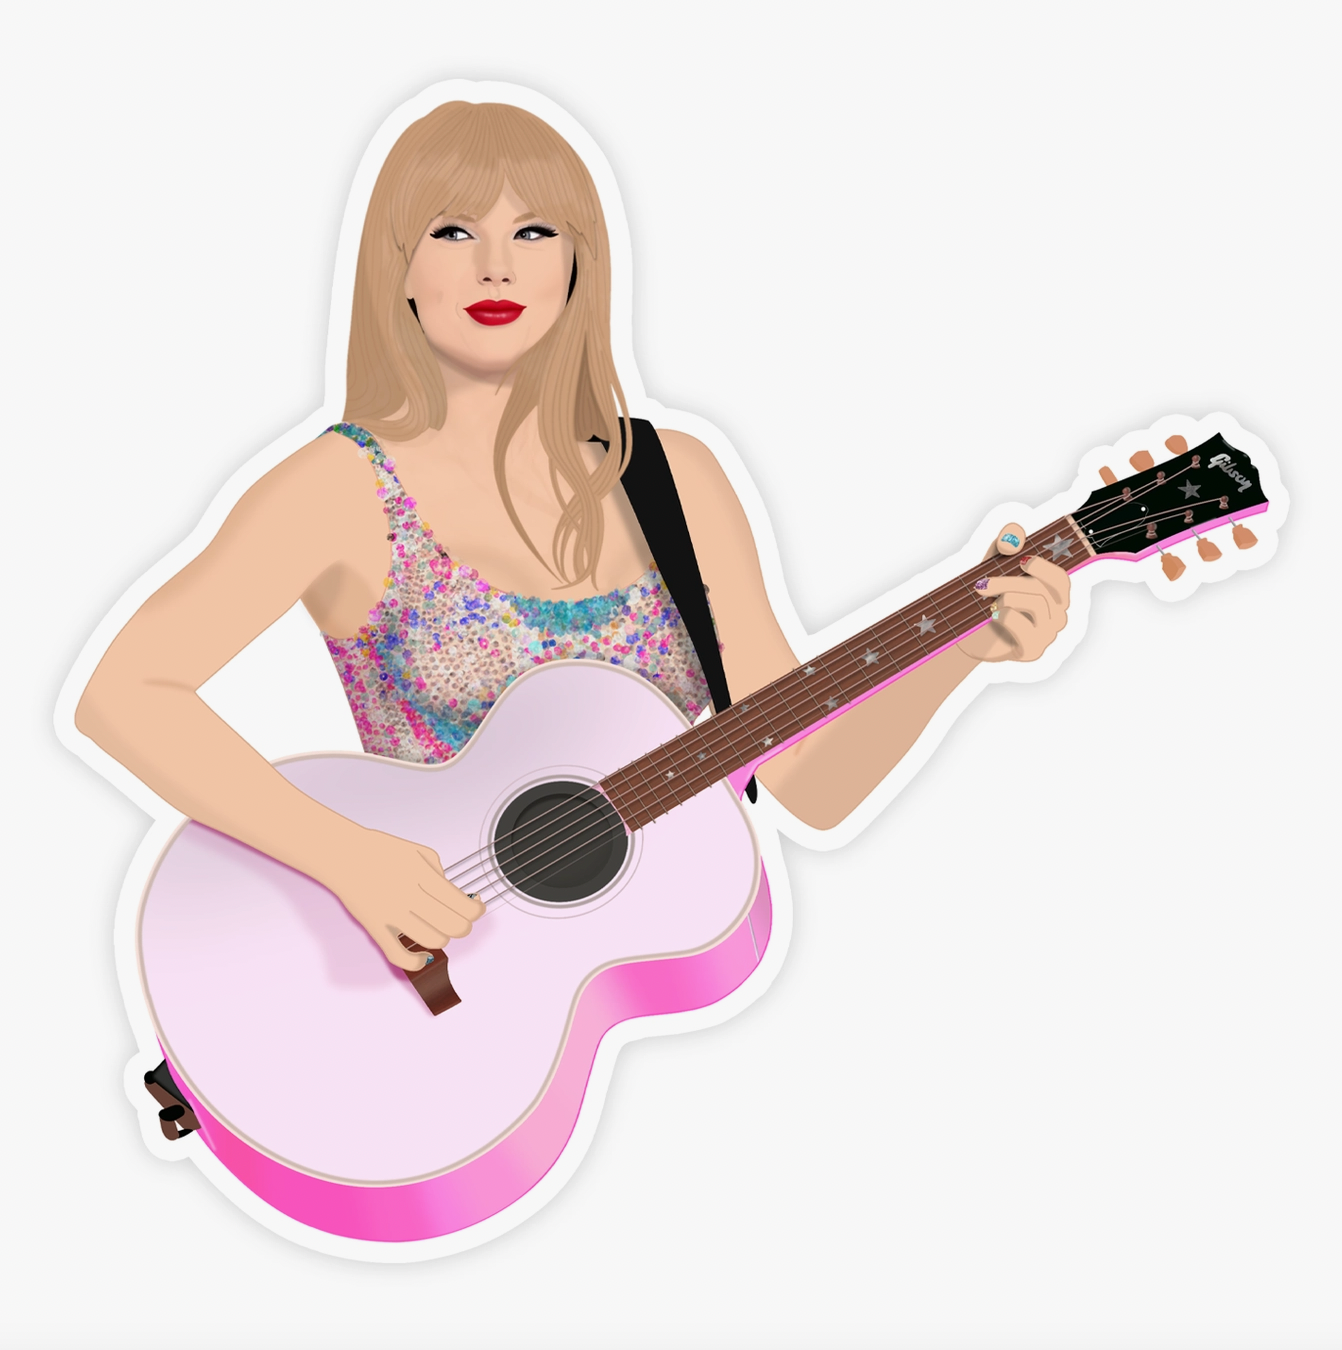 Taylor Swift Sticker Not A Lot Going On At The Moment